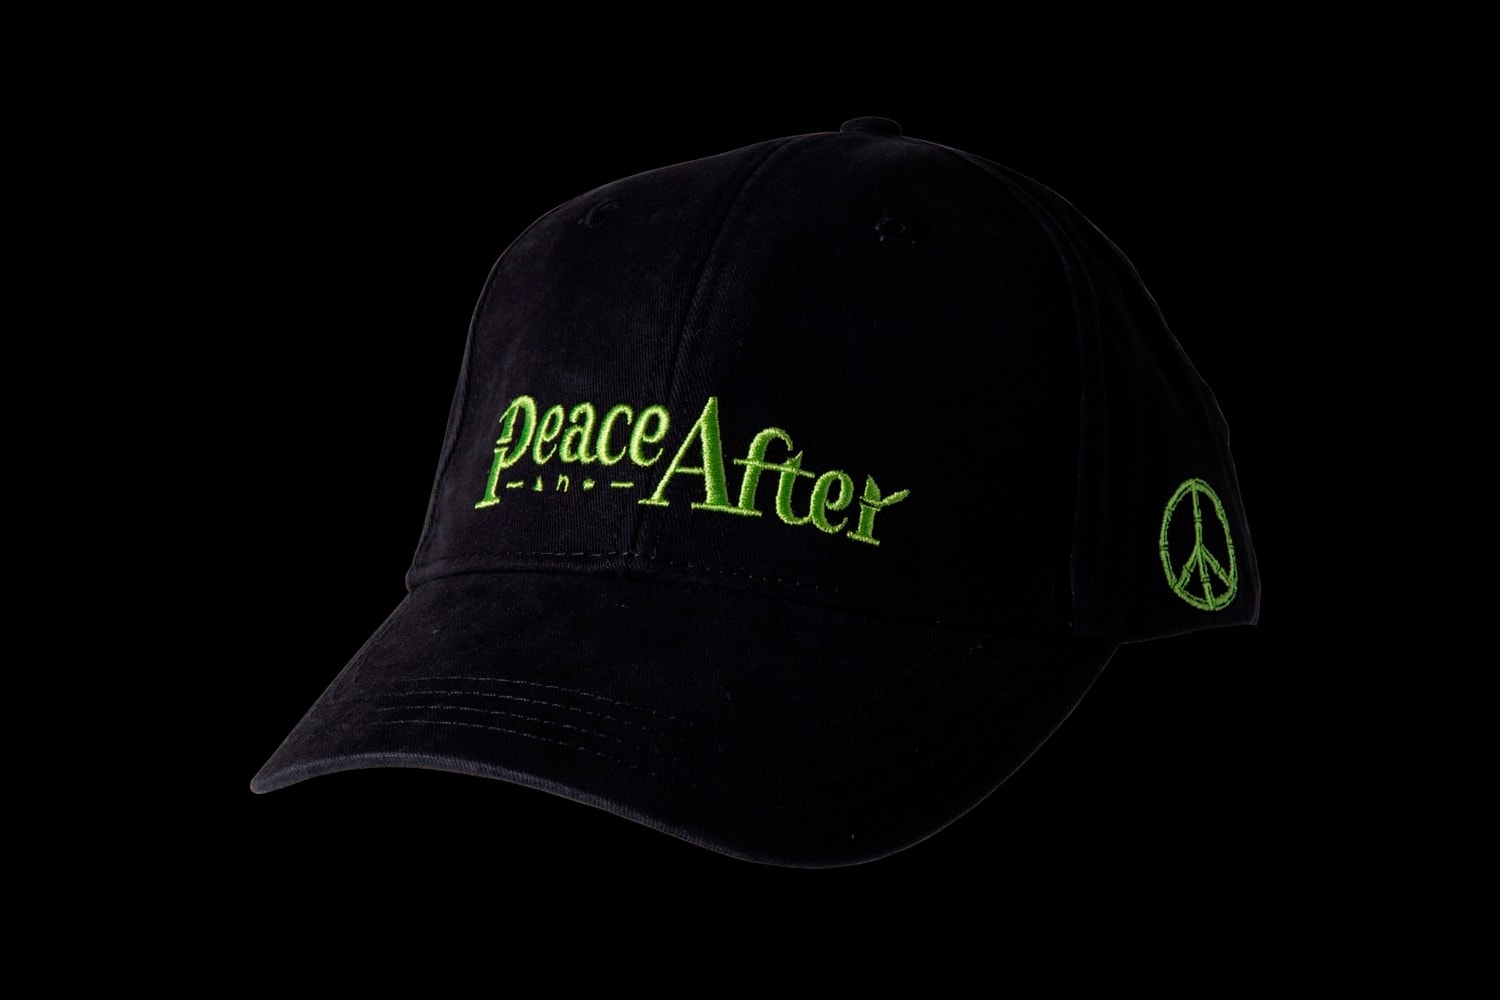 PEACE AND AFTER Embroidered Logo Caps Release Info White Green Orange